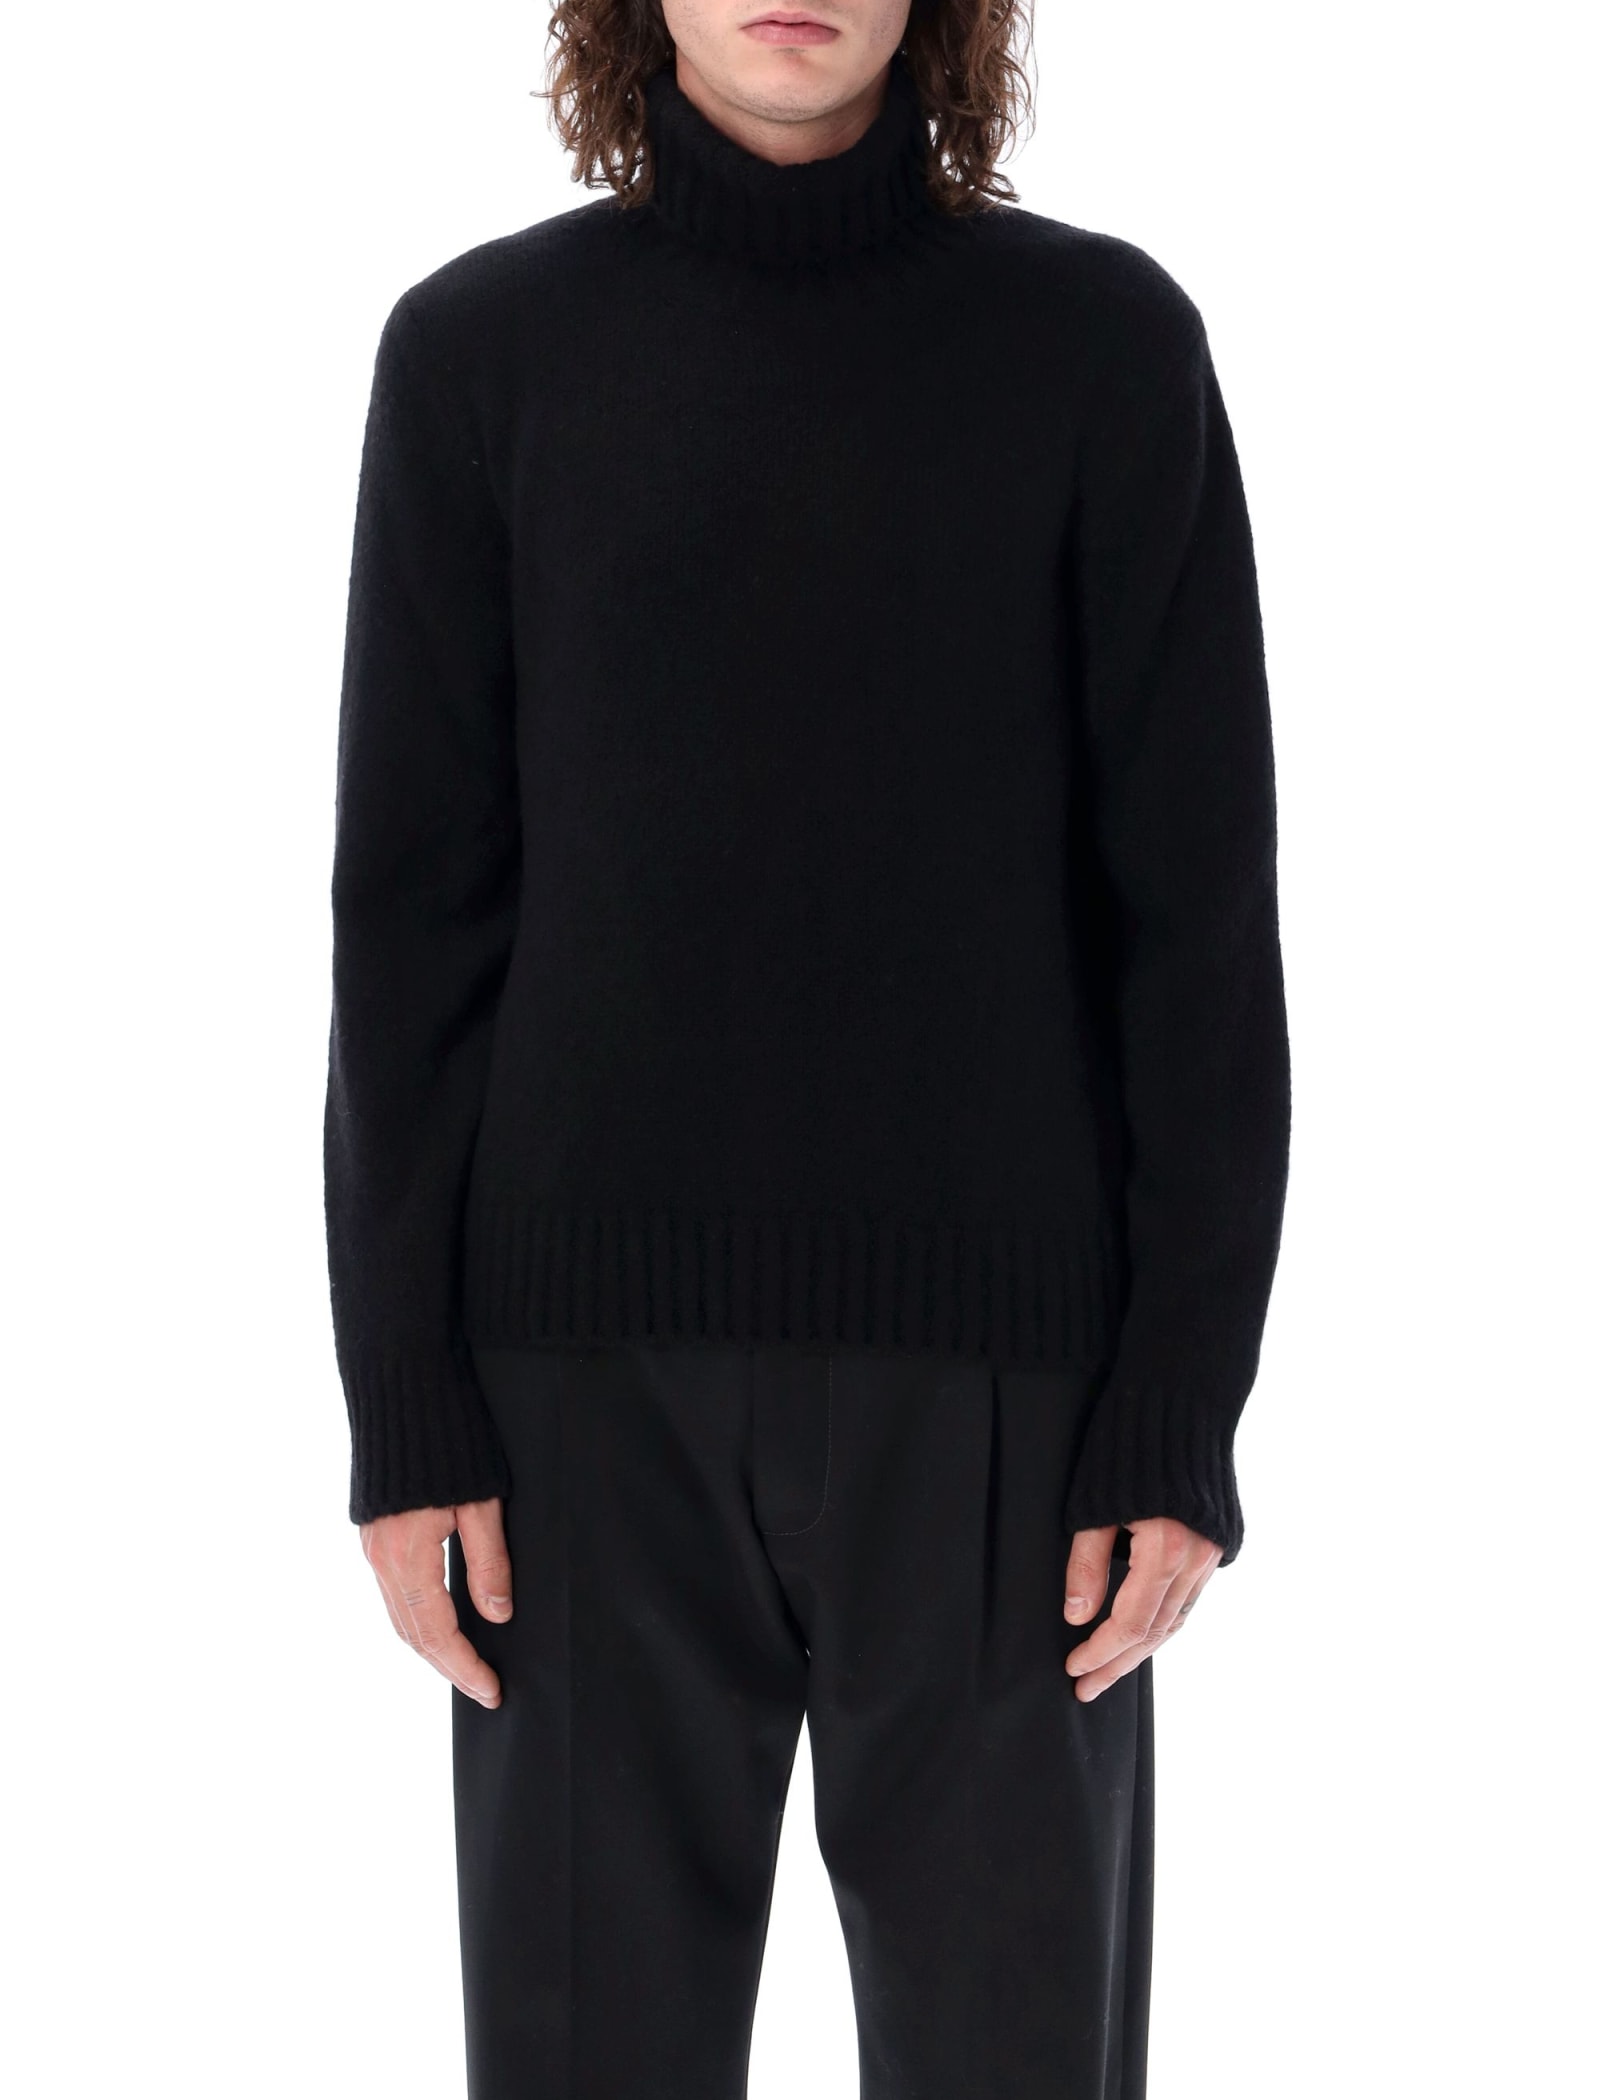 TOM FORD HIGH-NECK SWEATER